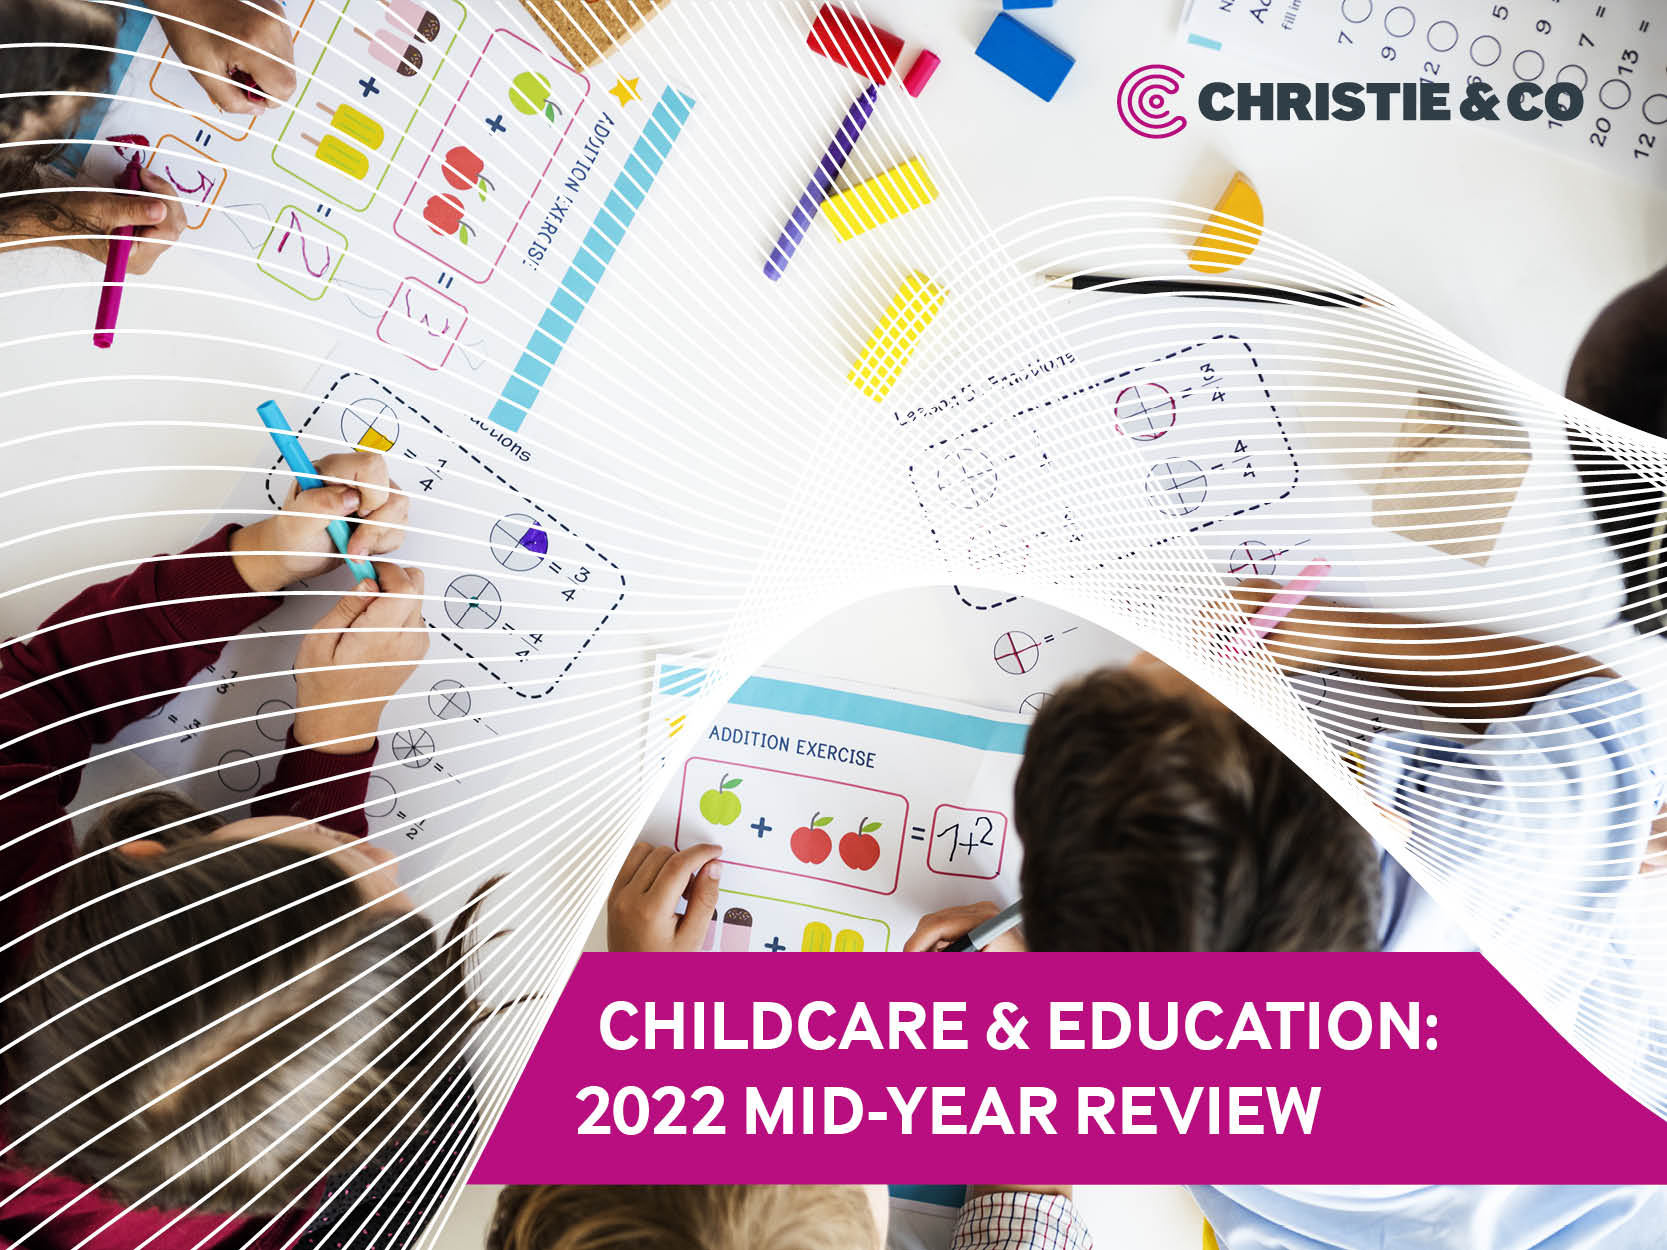 Christie & Co's Childcare & Education: 2022 Mid-Year Review report